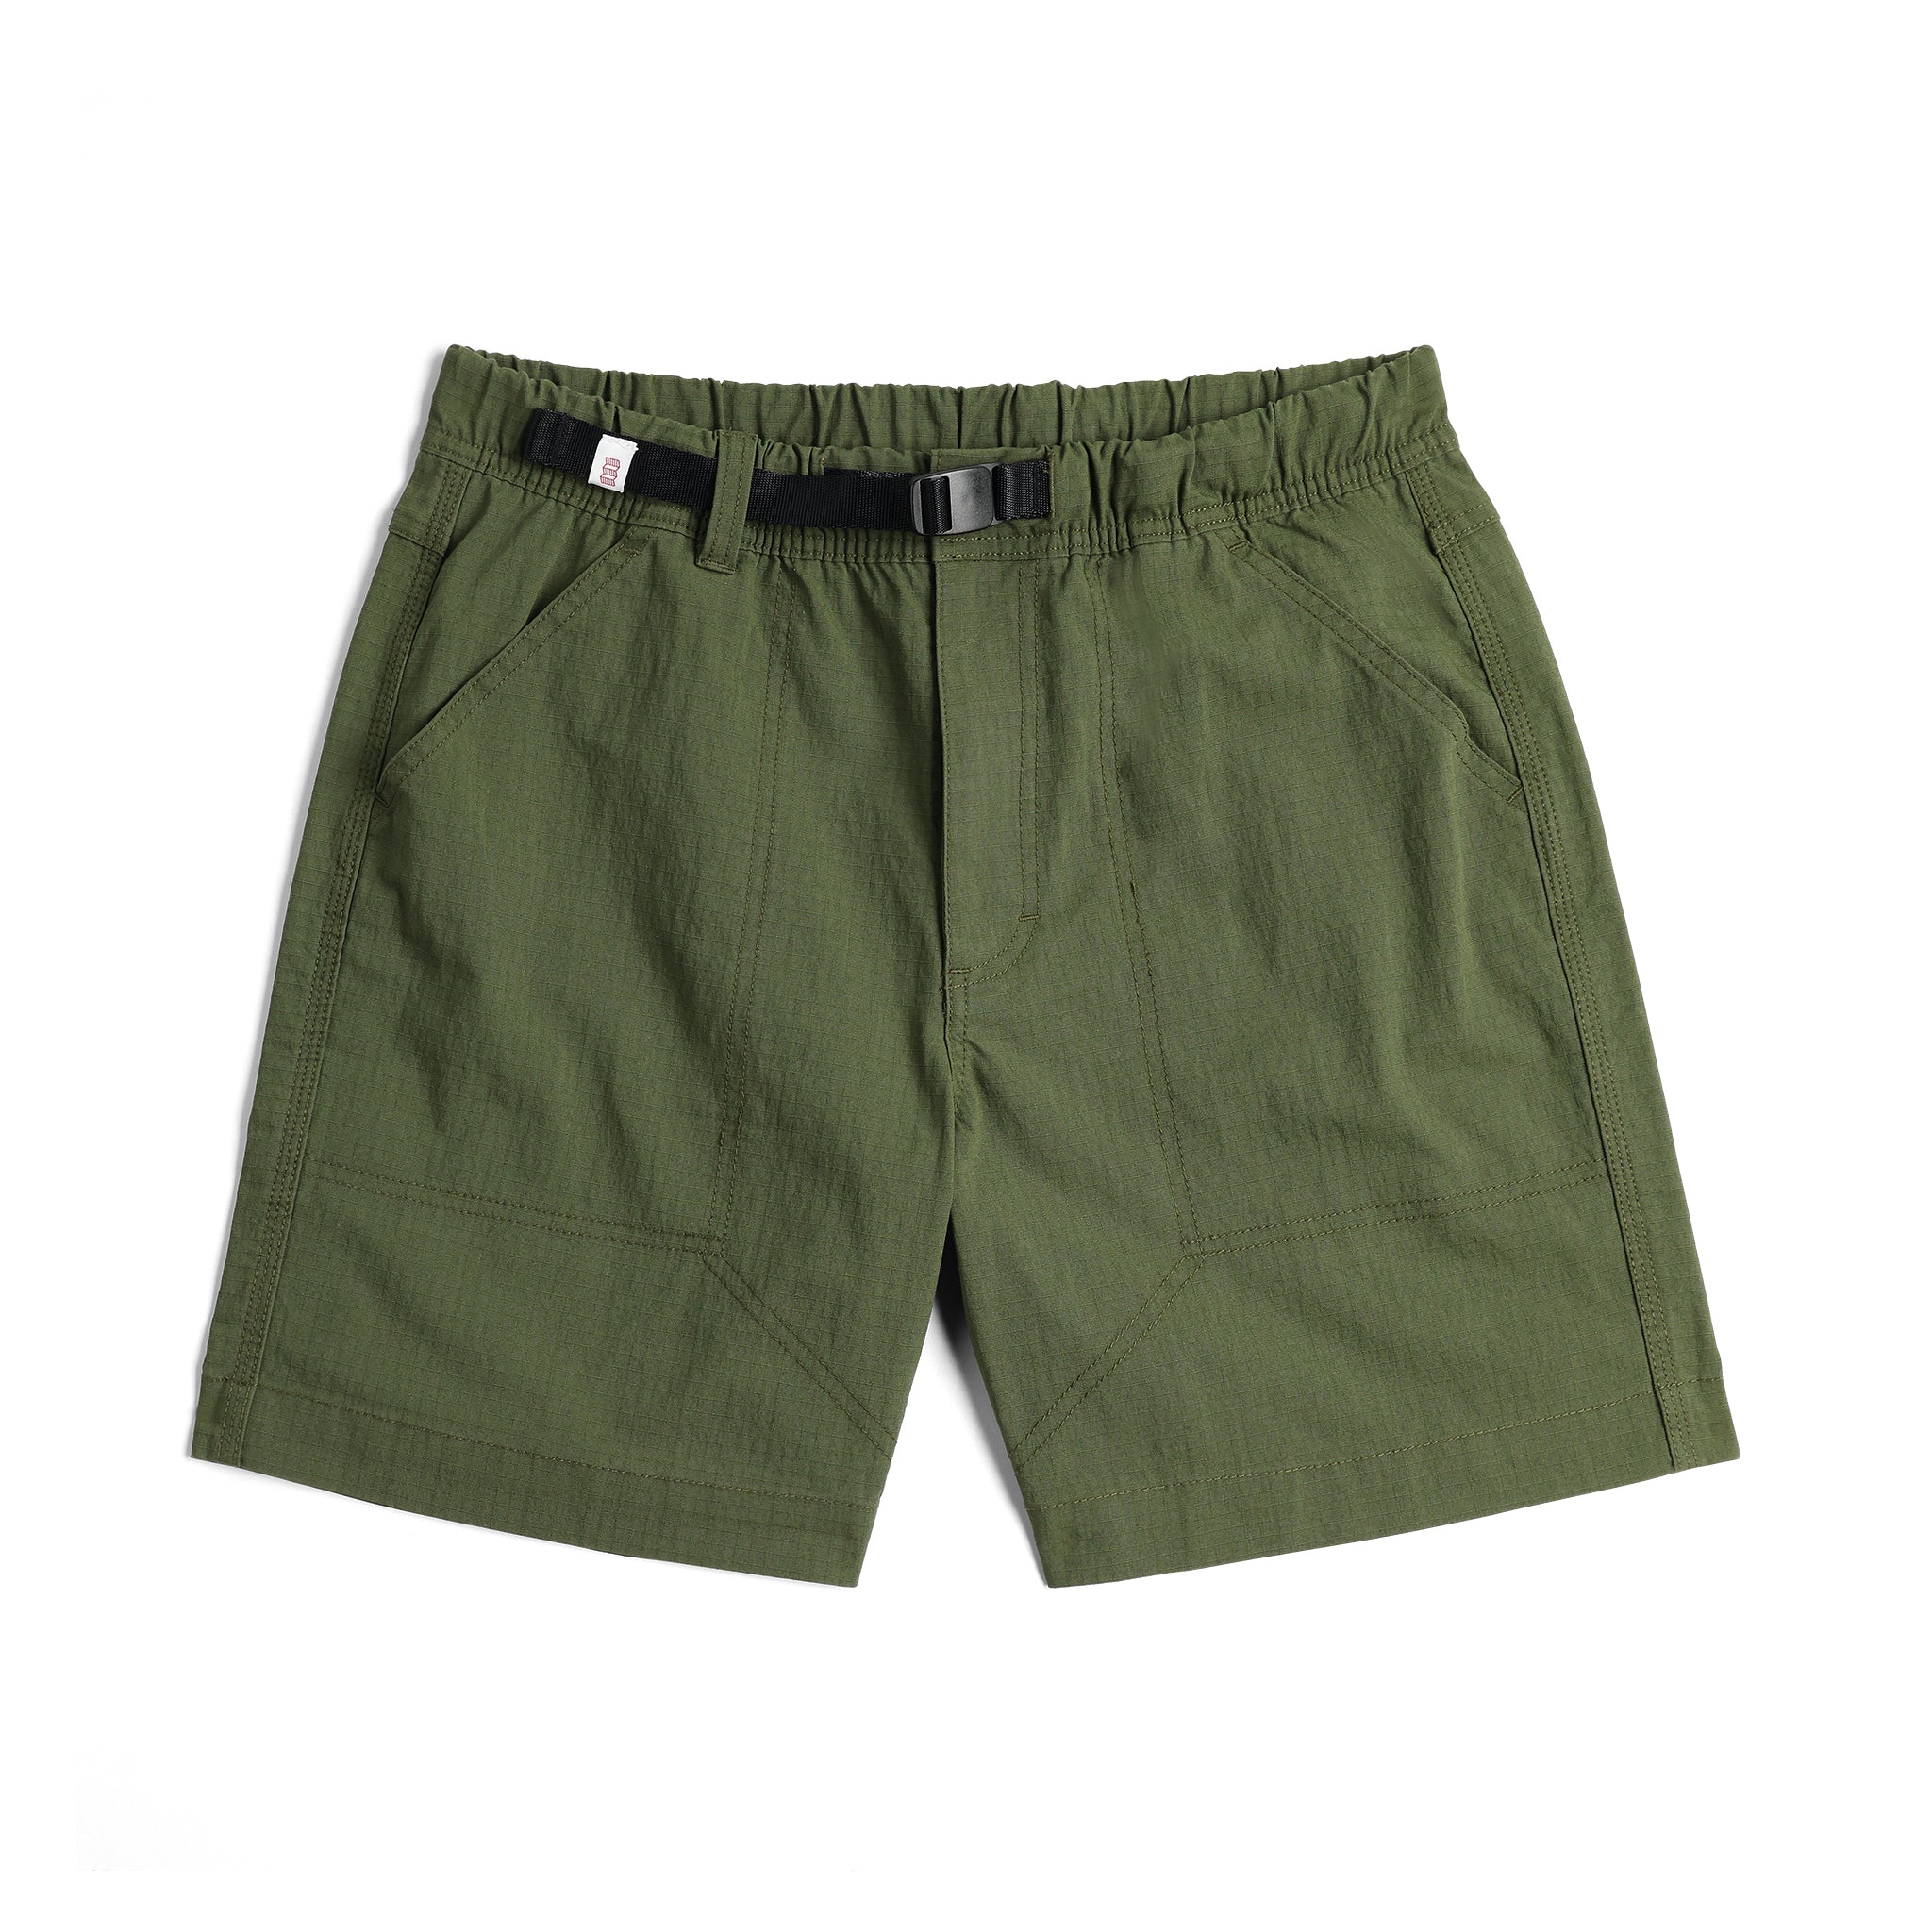 Front View of Topo Designs Mountain Short Ripstop - Men's in "Olive"